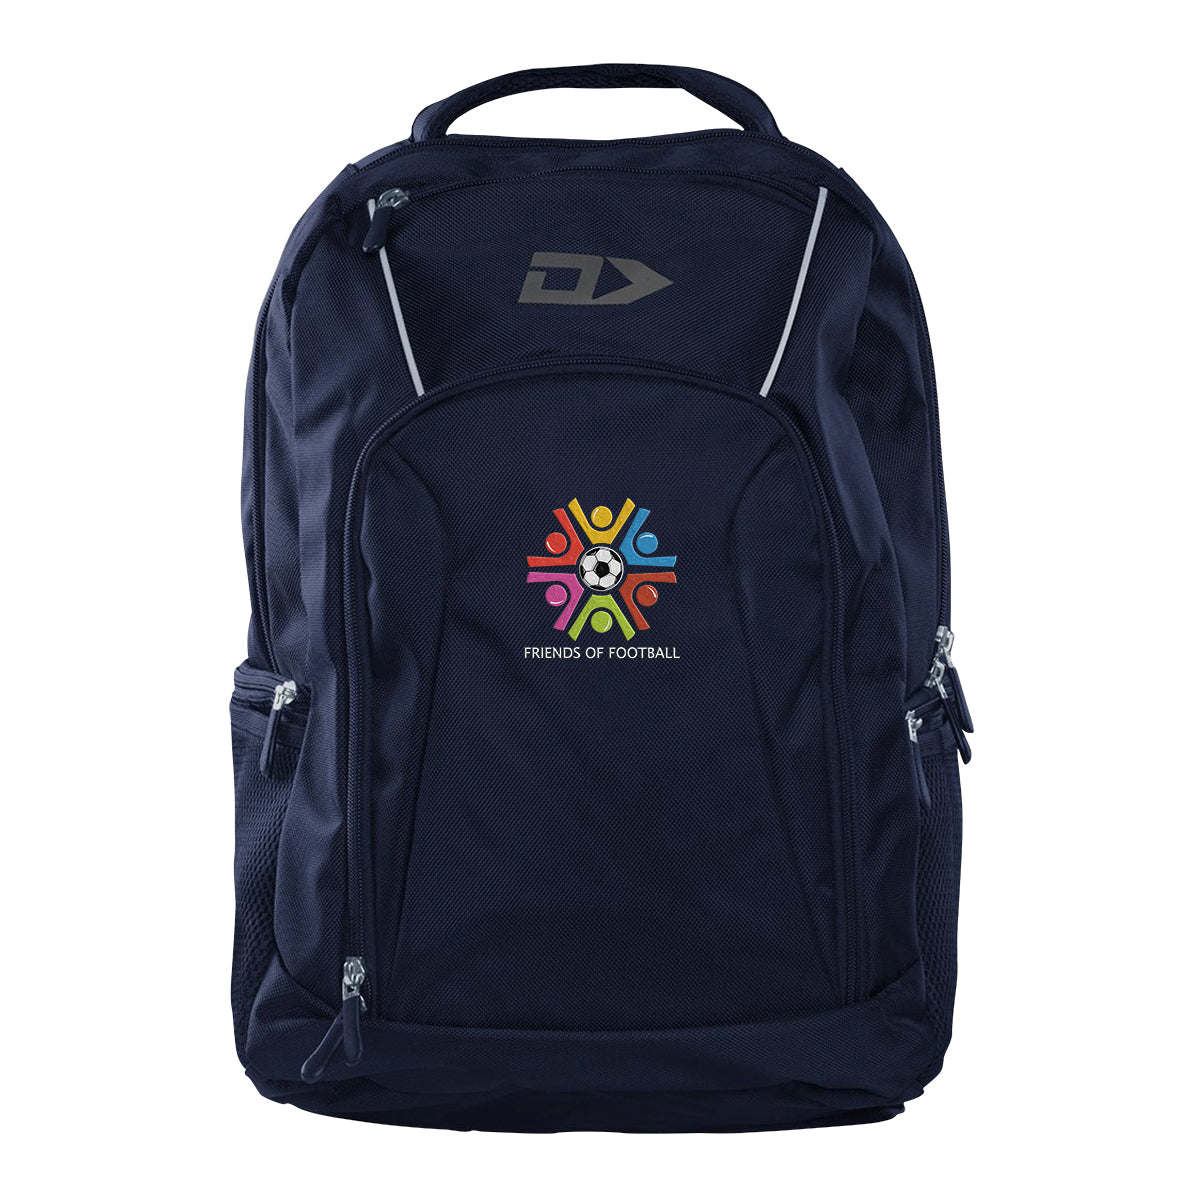 Friends of Football Backpack